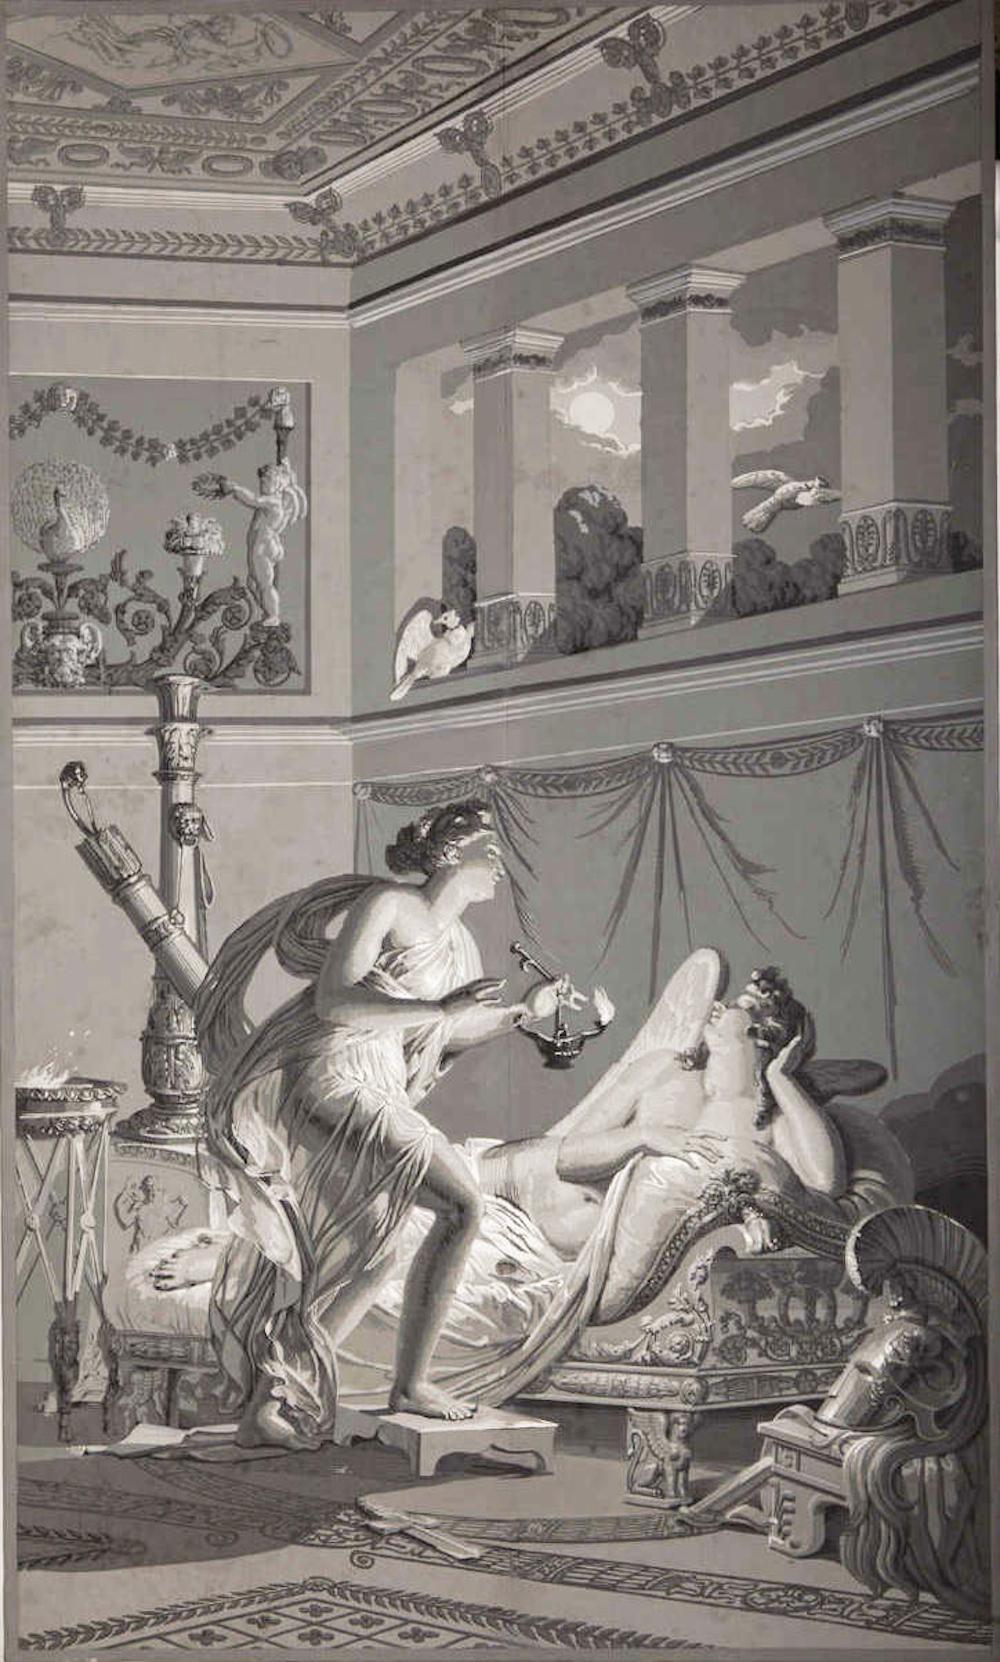 Five Wall Decoration 'En Grisaille' by Dufour, Paris, France, 19th Century - Painting by Unknown